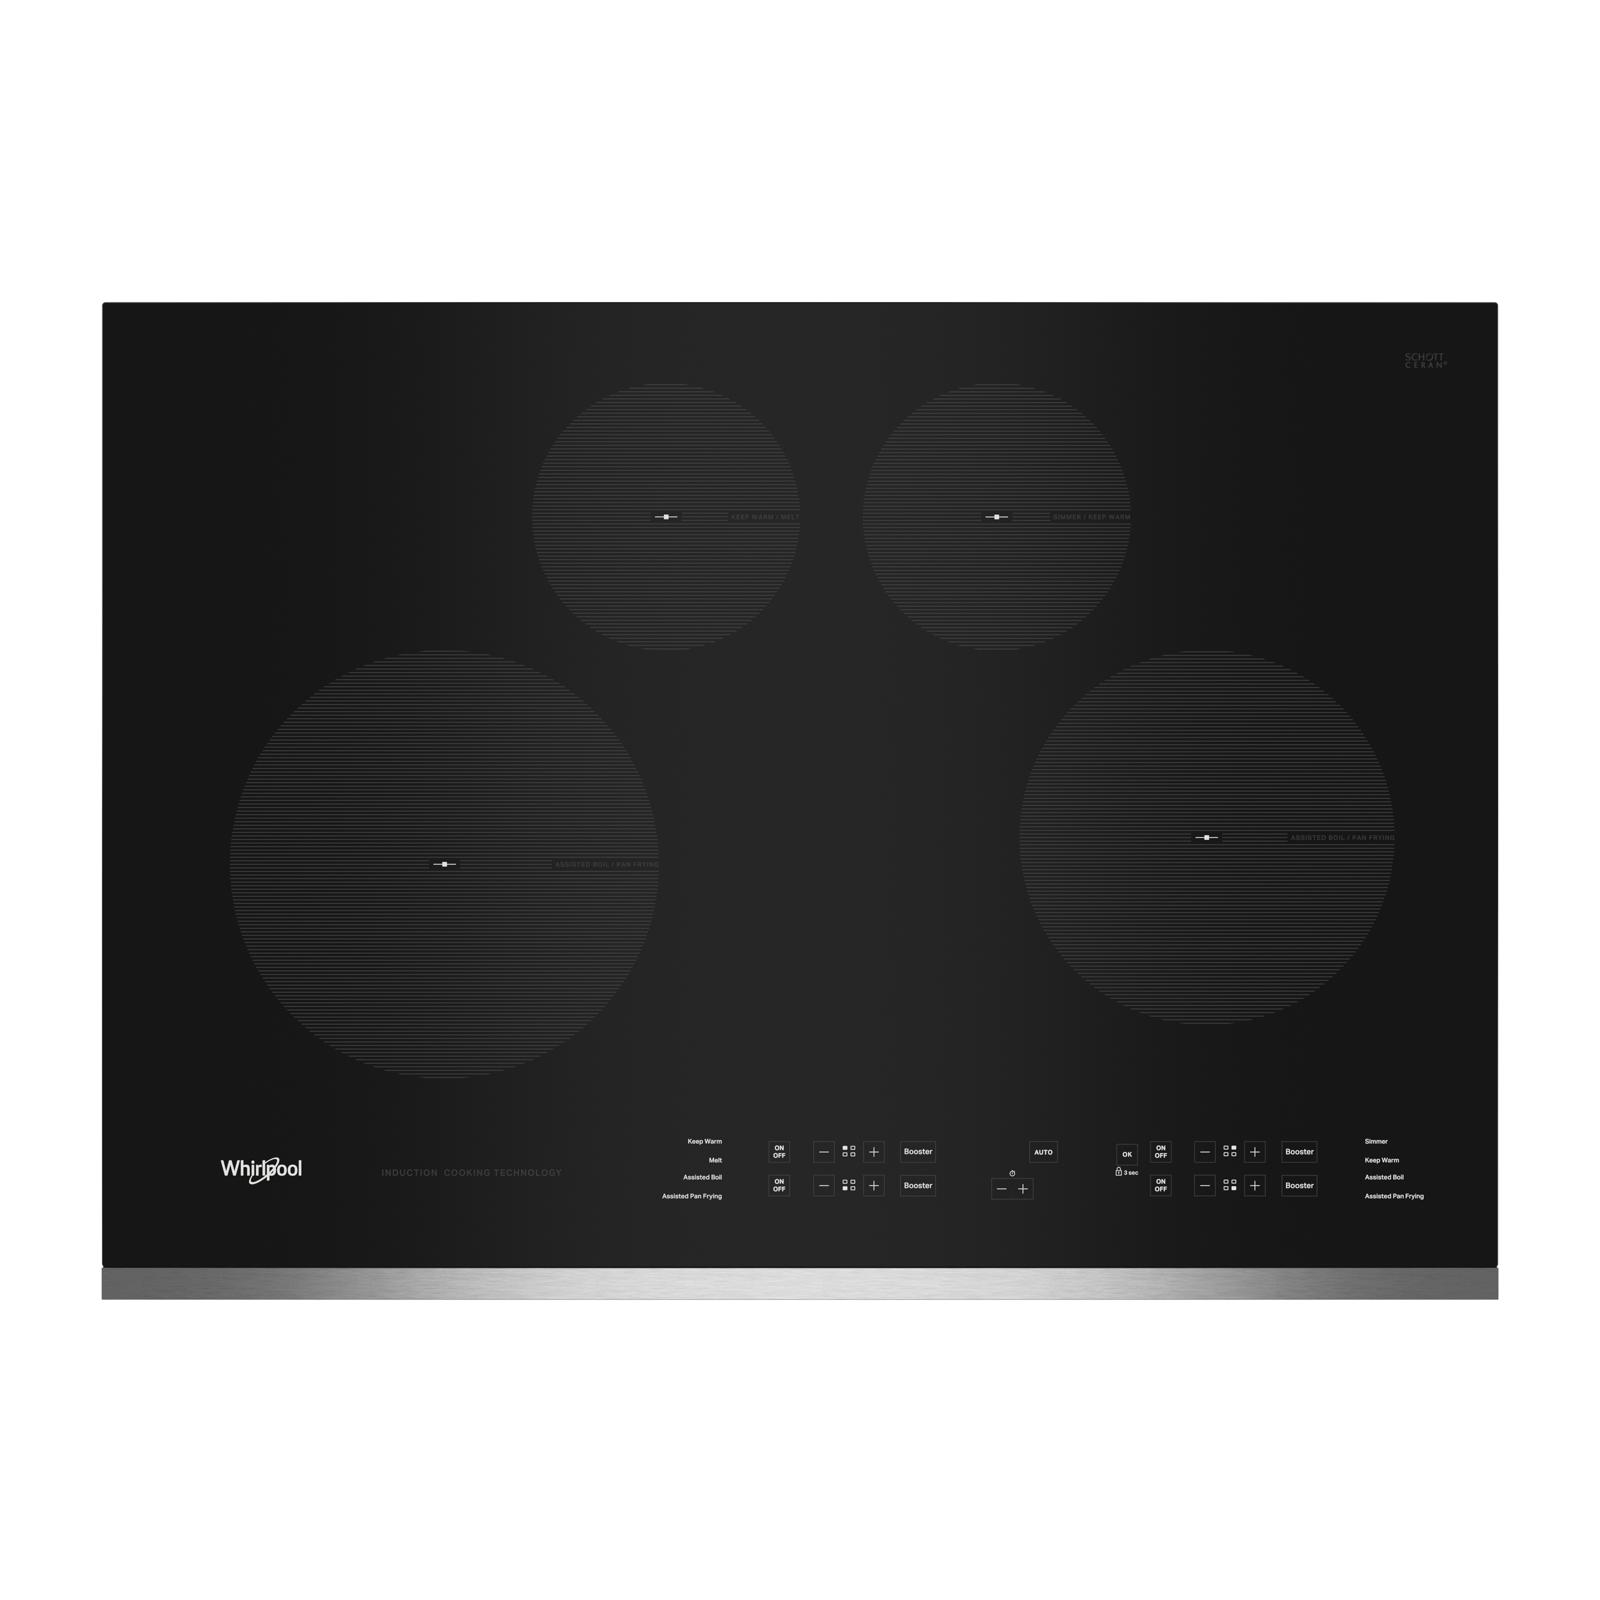 Whirlpool - 30.75 inch wide Induction Cooktop in Black - WCI55US0JS